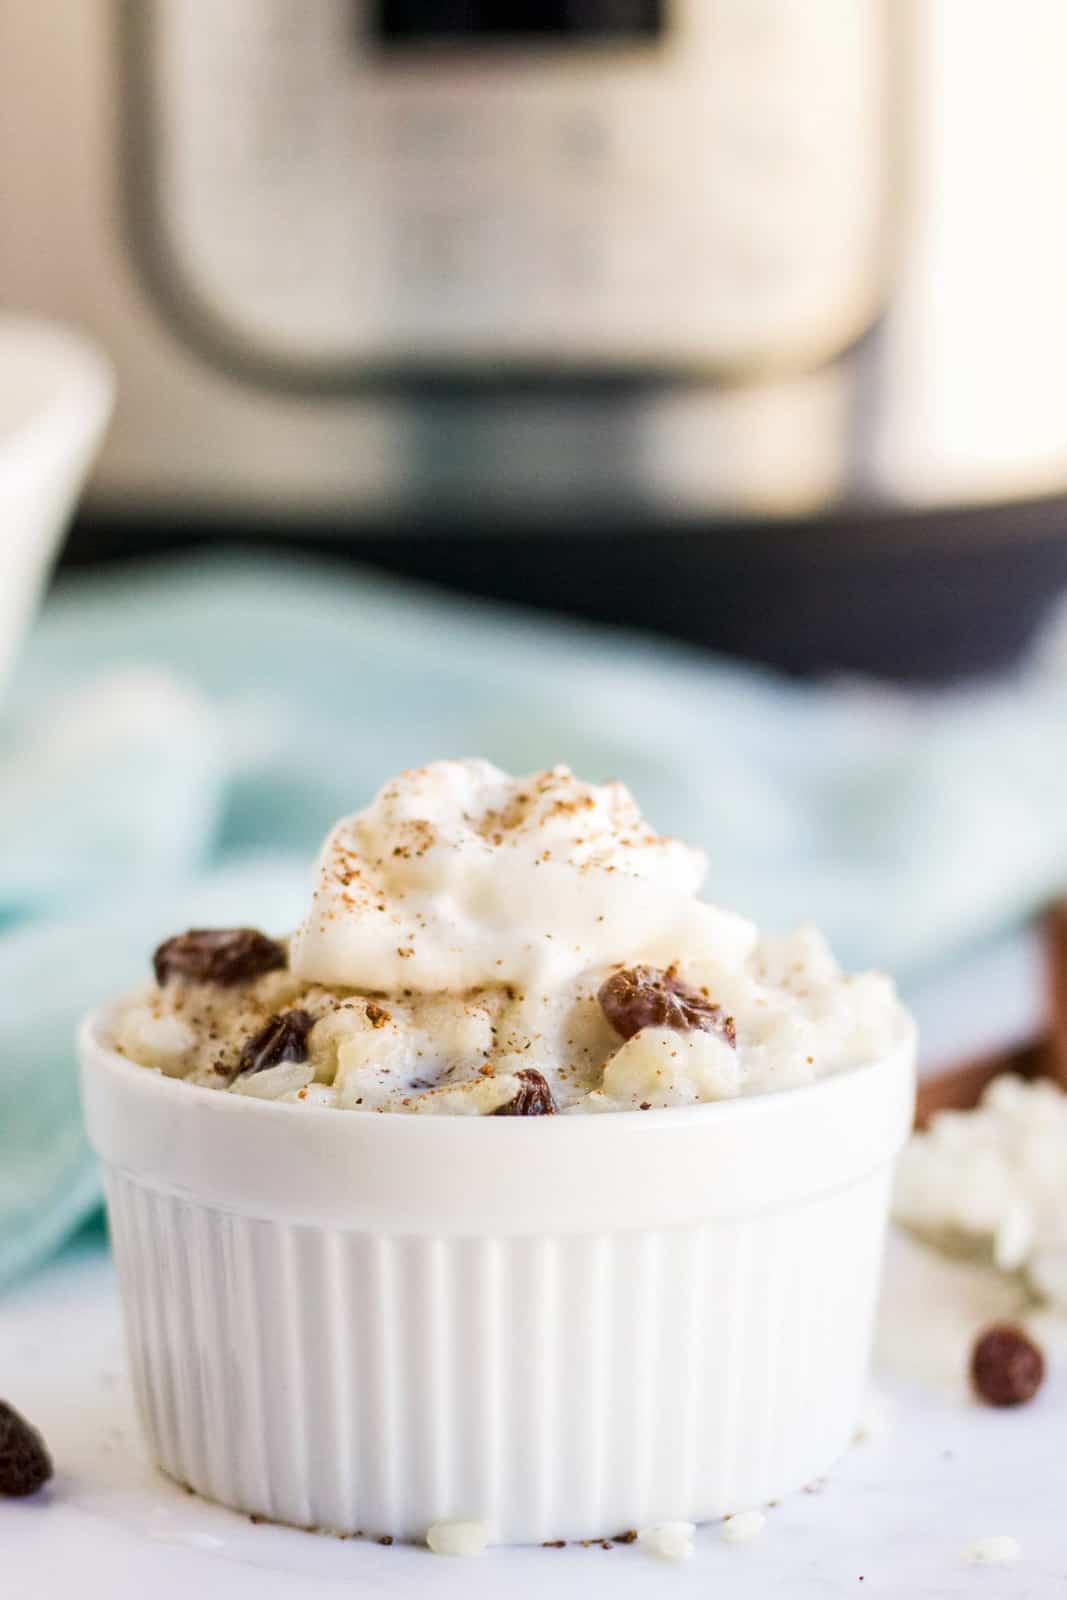 Ramekin of Rice Pudding topped with whipped cream and cinnamon